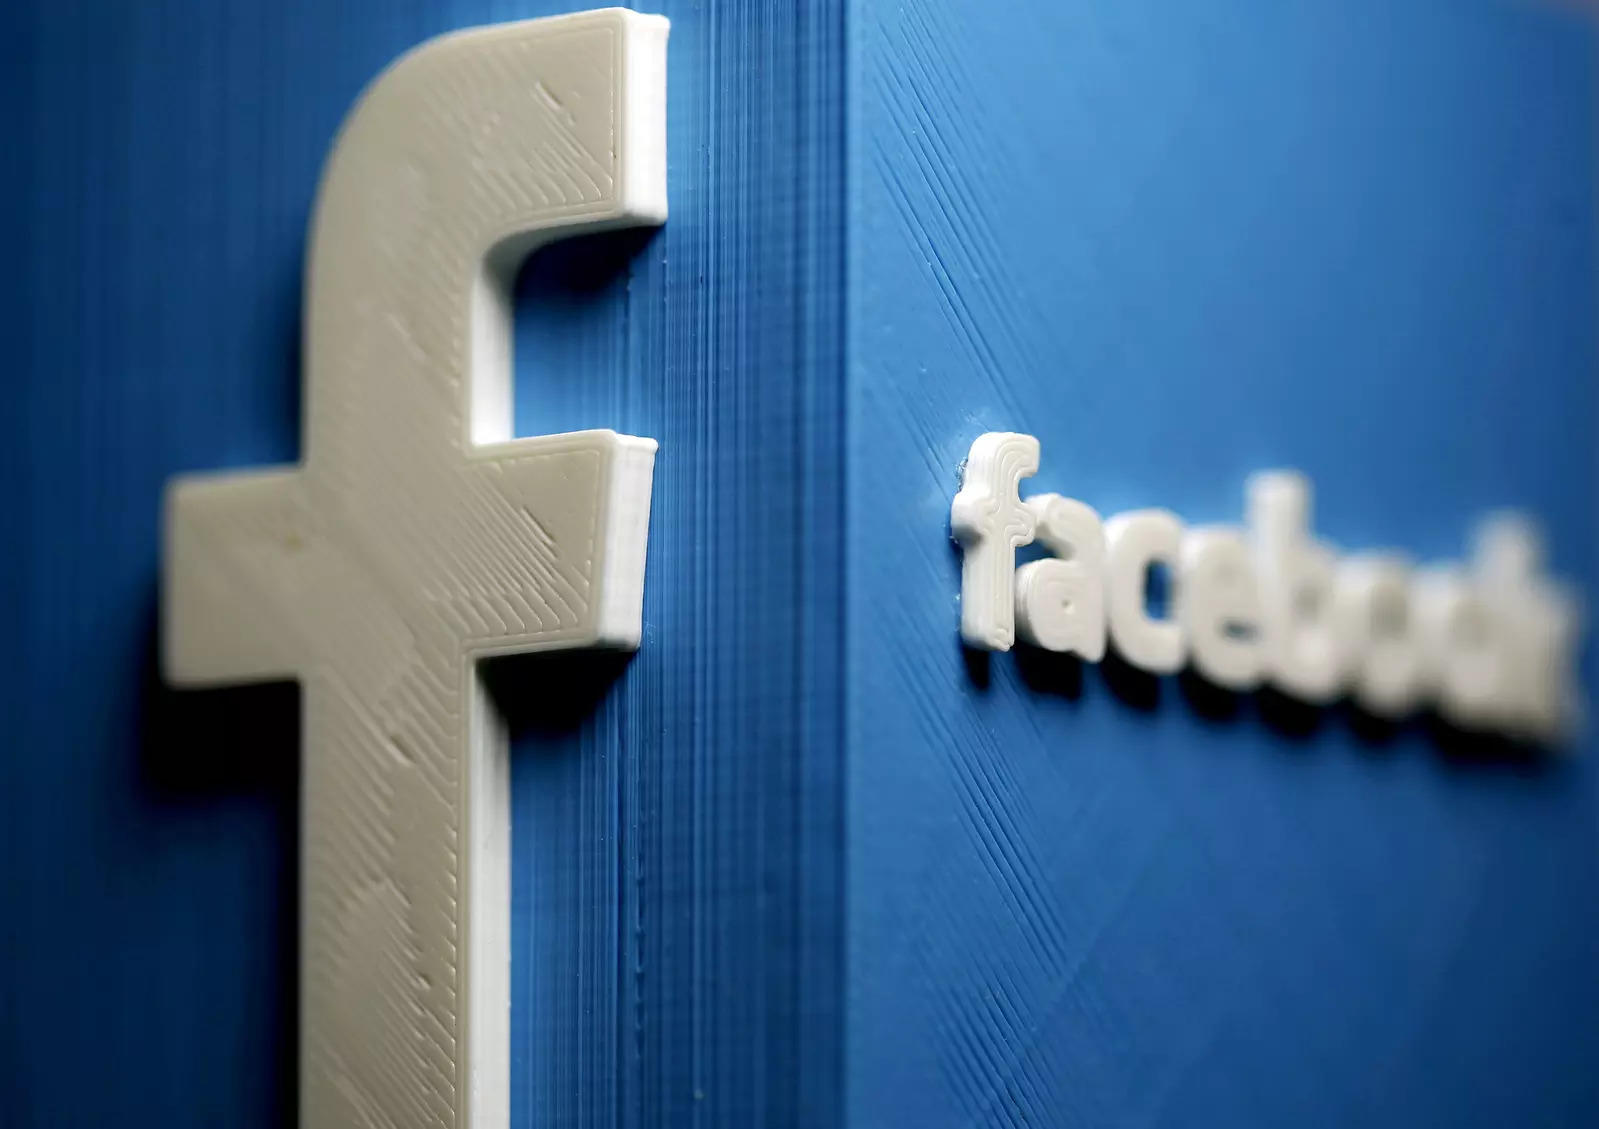 Facebook grows in Oregon with data center, fiber-optic cable